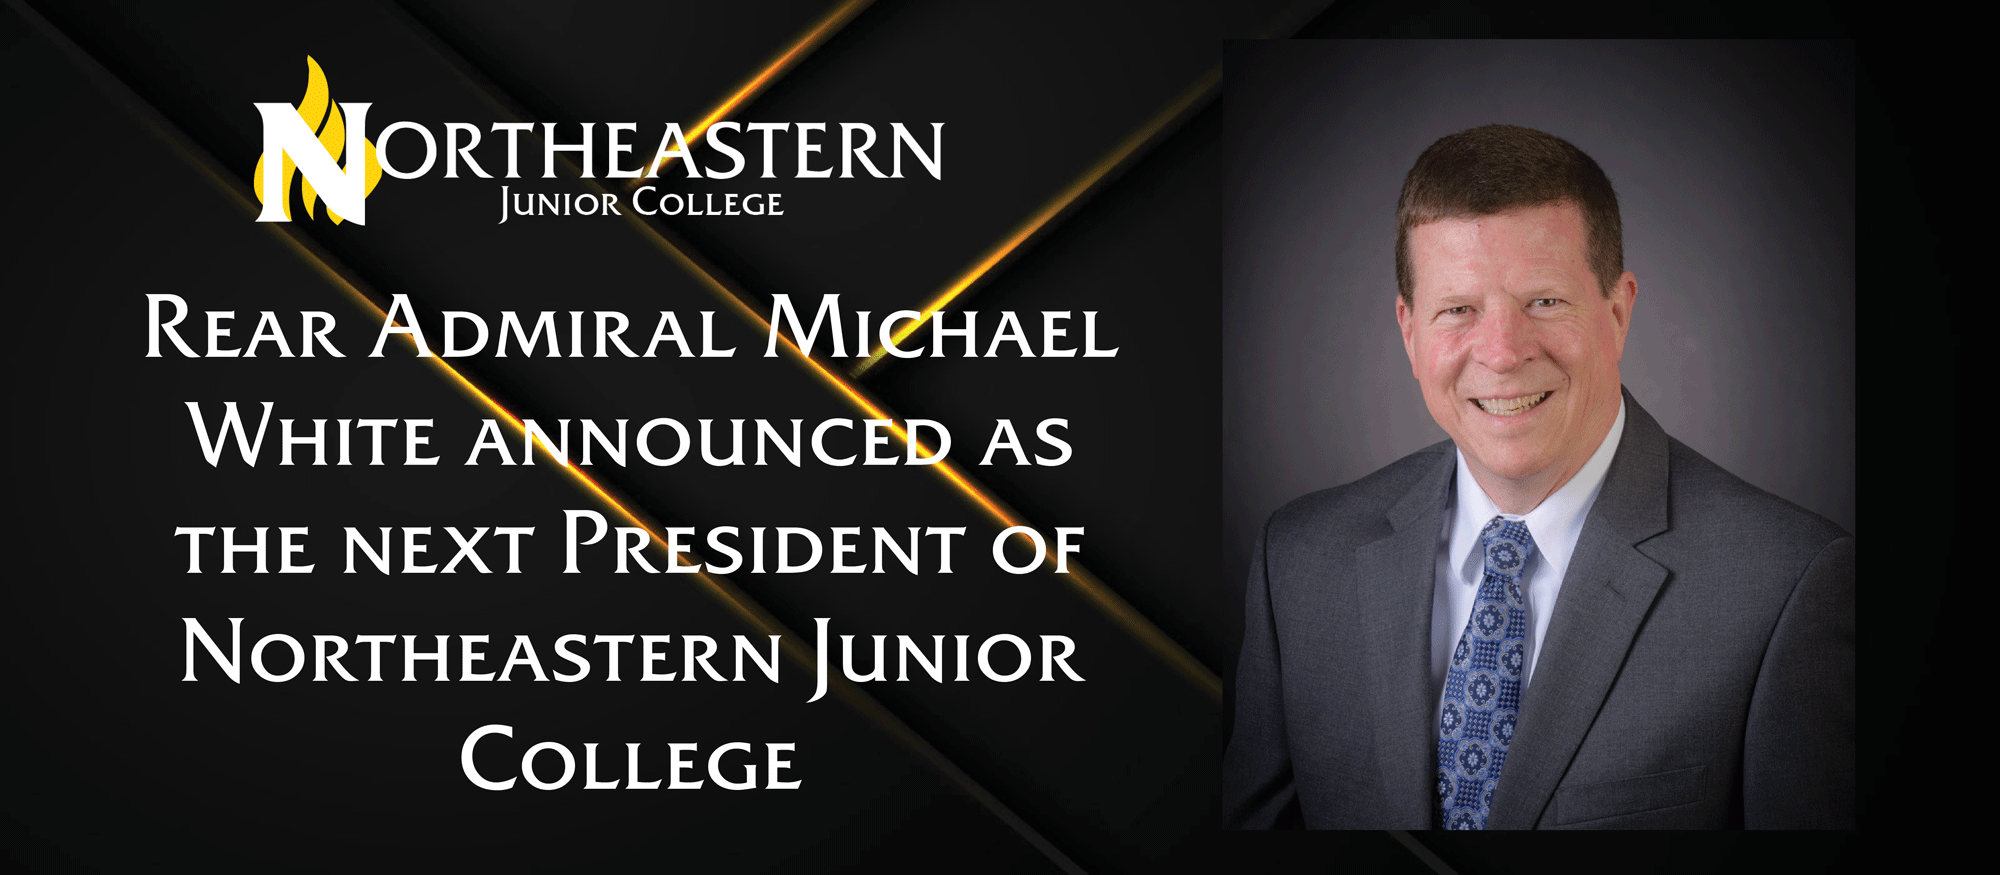 Rear Admiral Michael White Announced as the next president of northeastern junior college